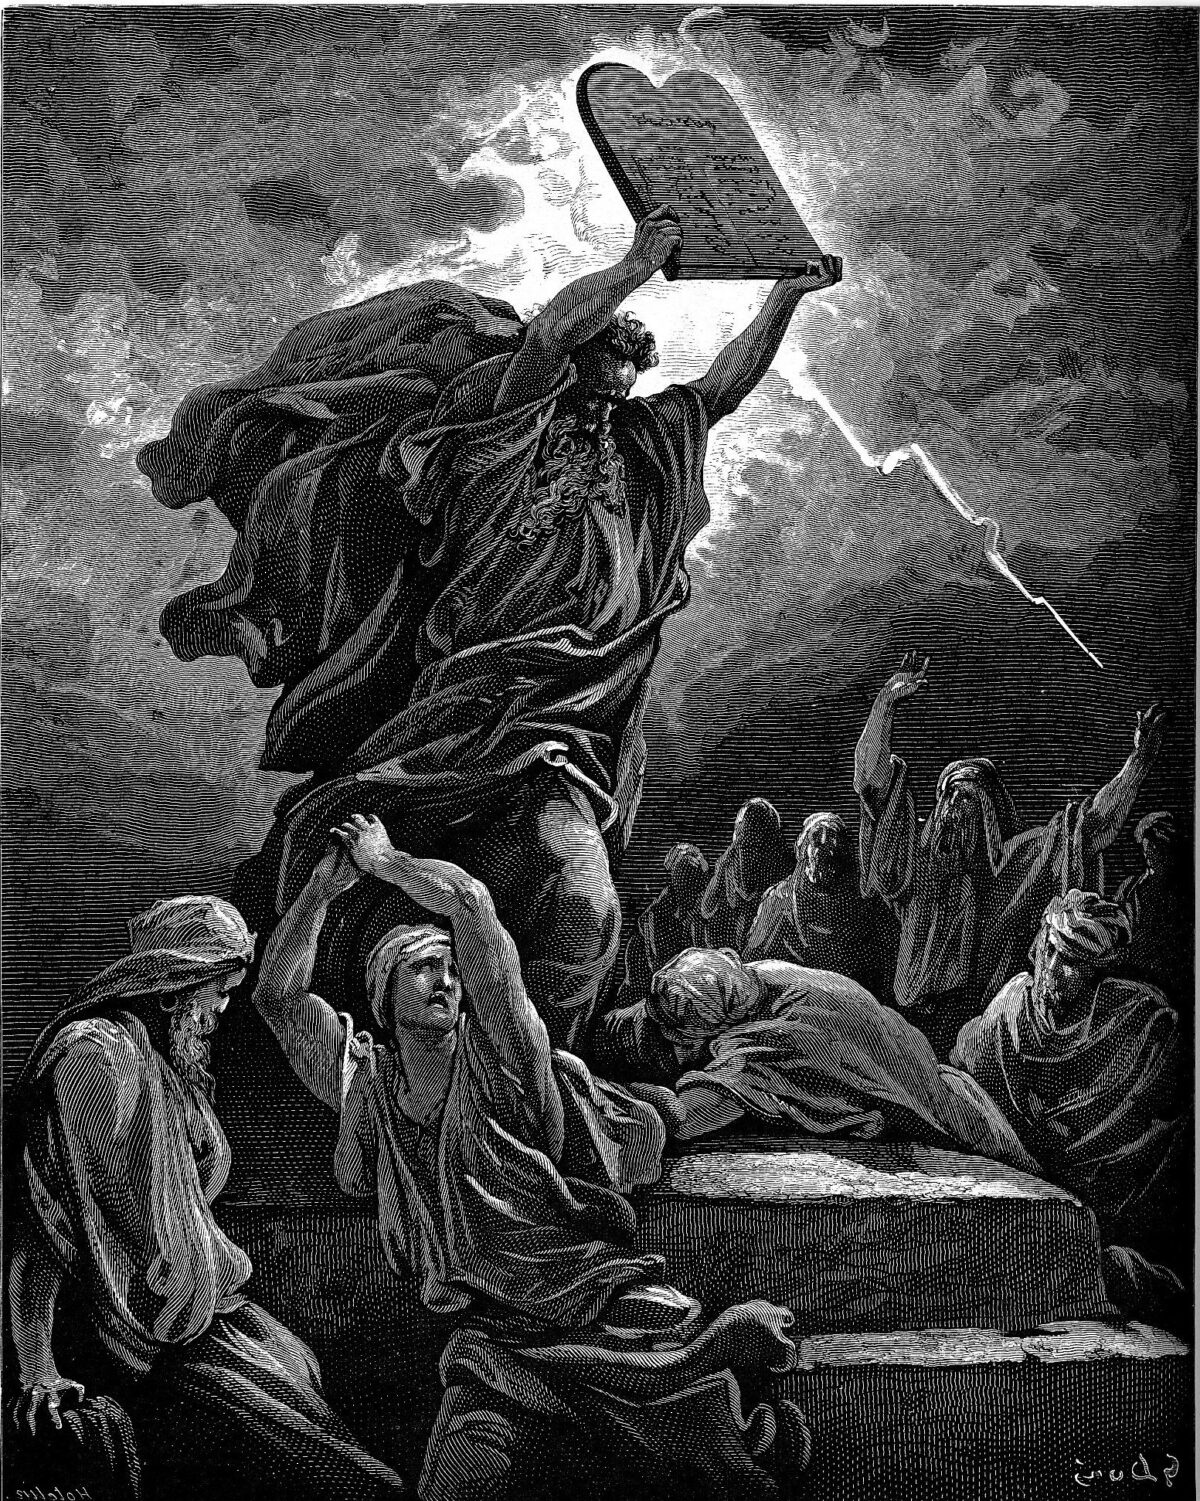 What is a revelation really? Was Moses’ accurate?